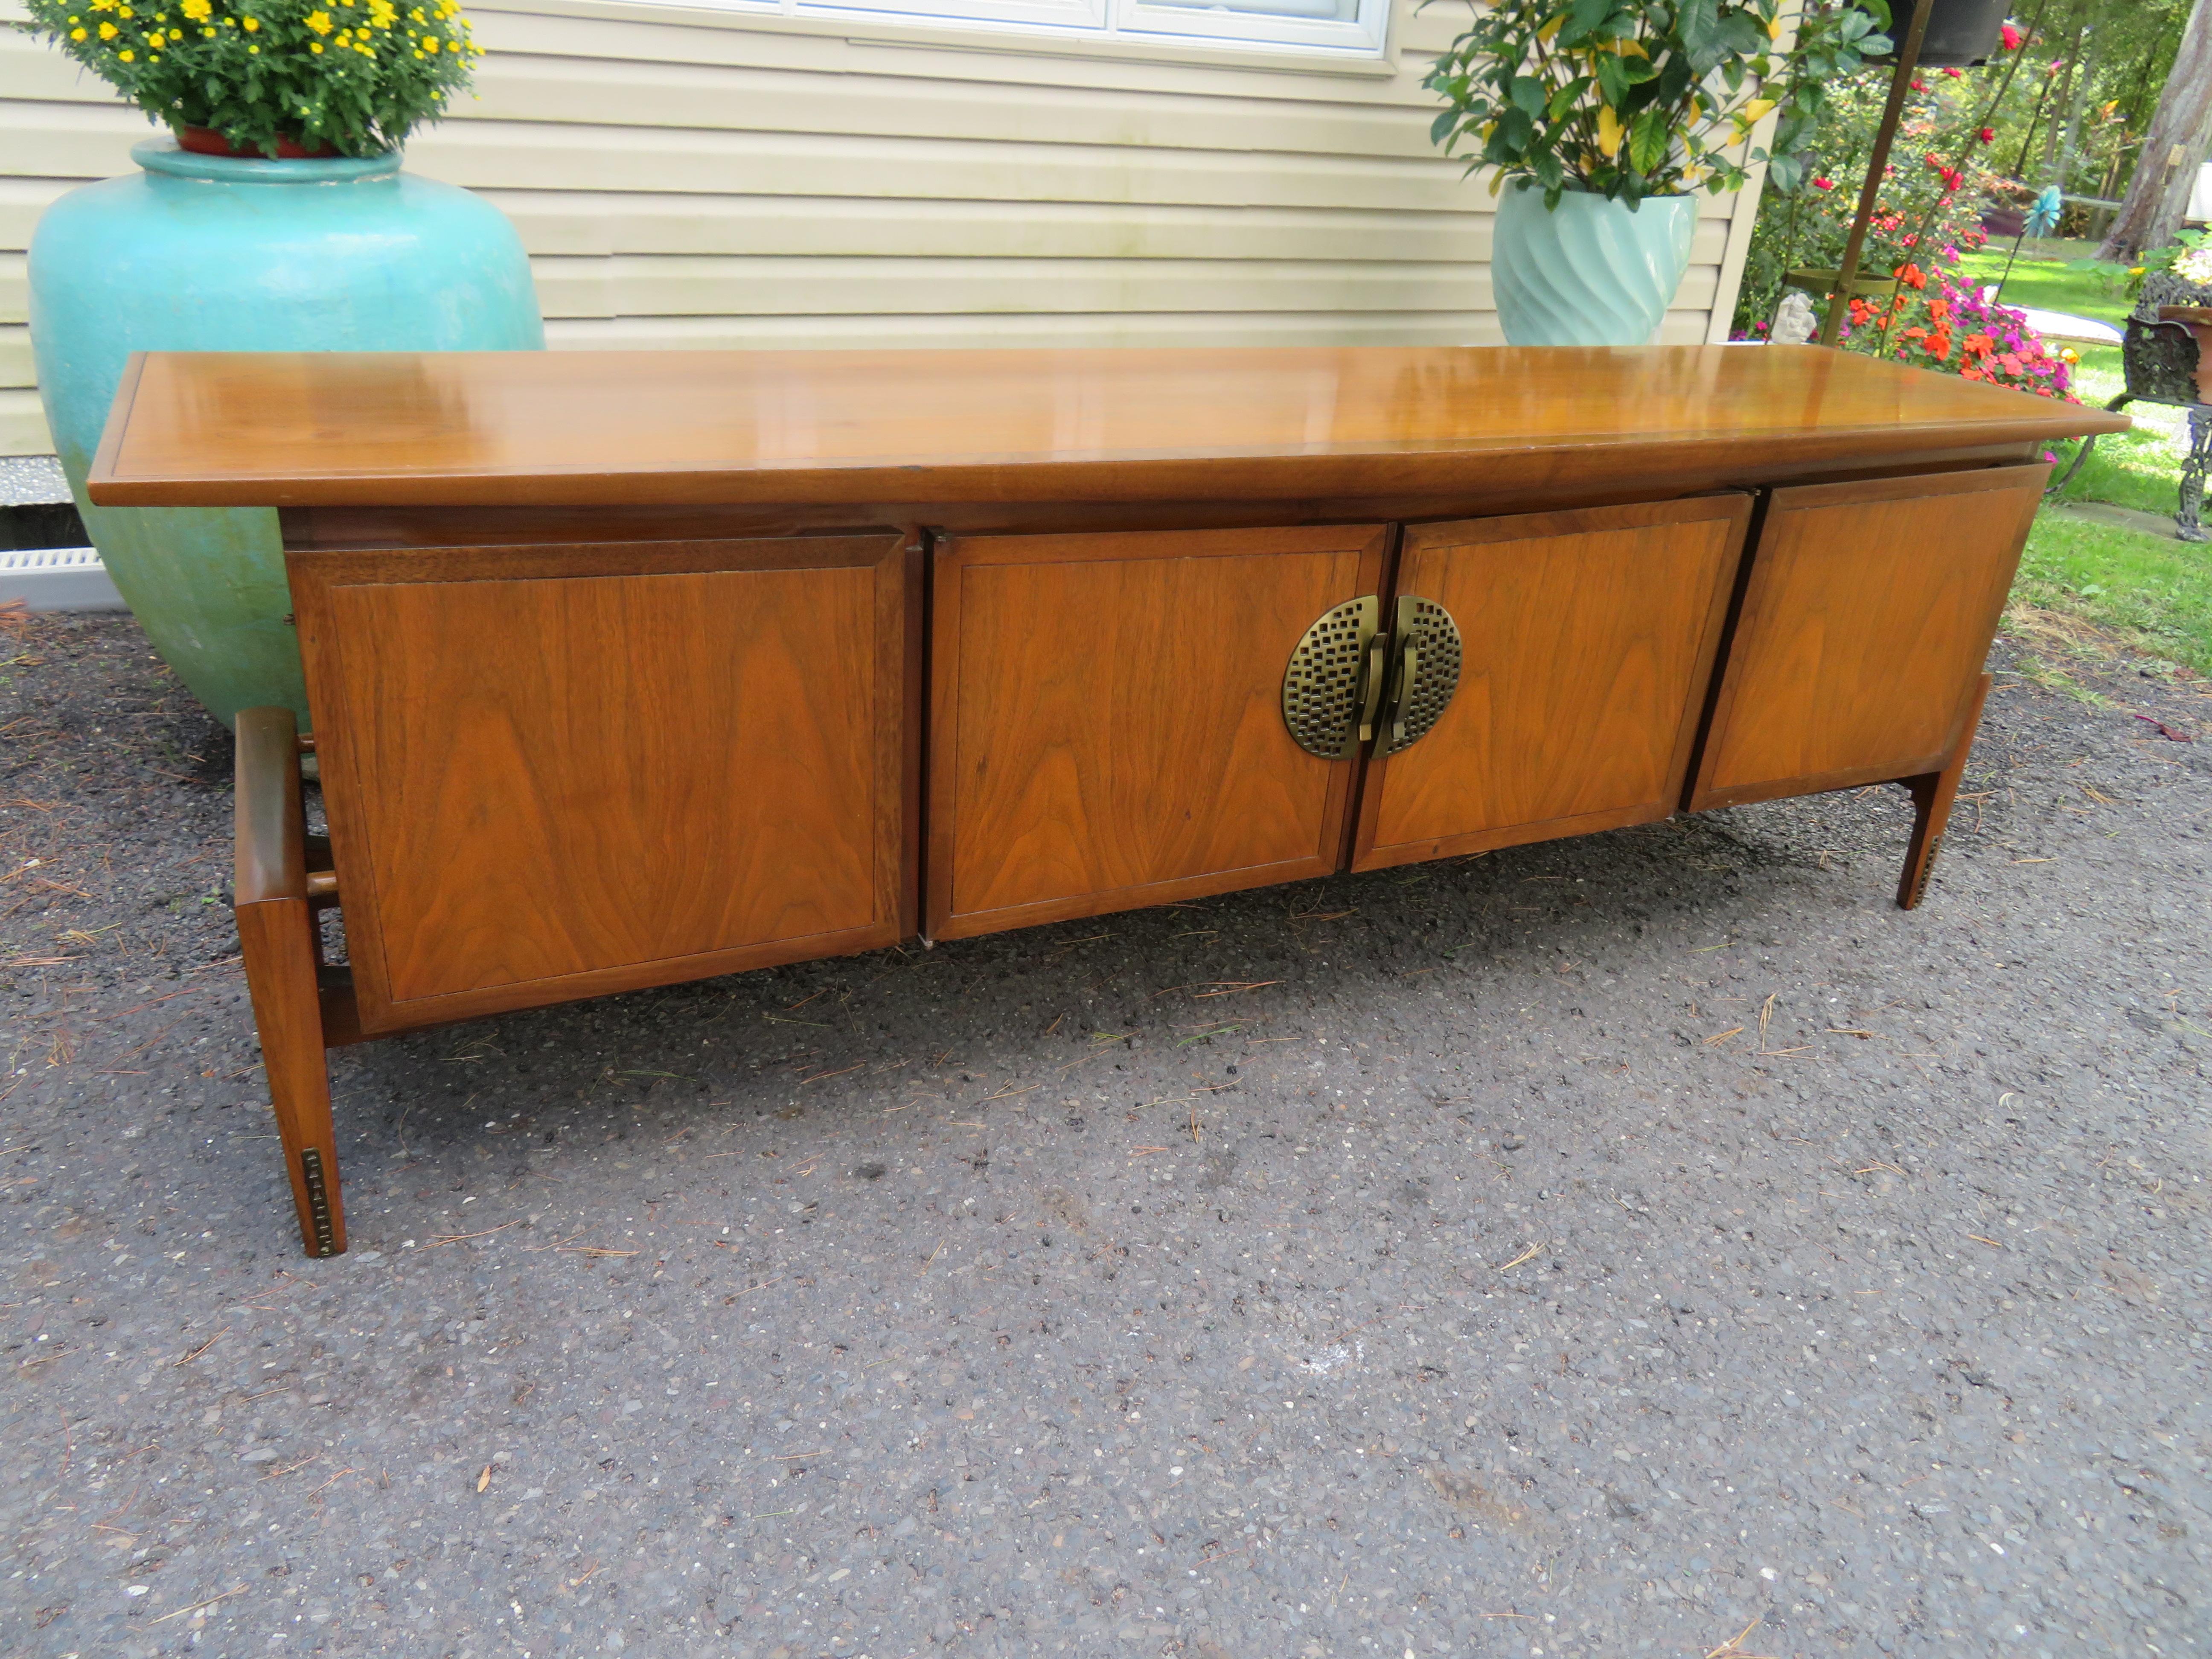 Stunning Helen Hobey Baker long low credenza Dresser with an Asian infusion. This sleek low walnut credenza has 2 open spaces on either side and 2 drawers hidden behind central doors. We love the interesting pierced large medallion hardware and the